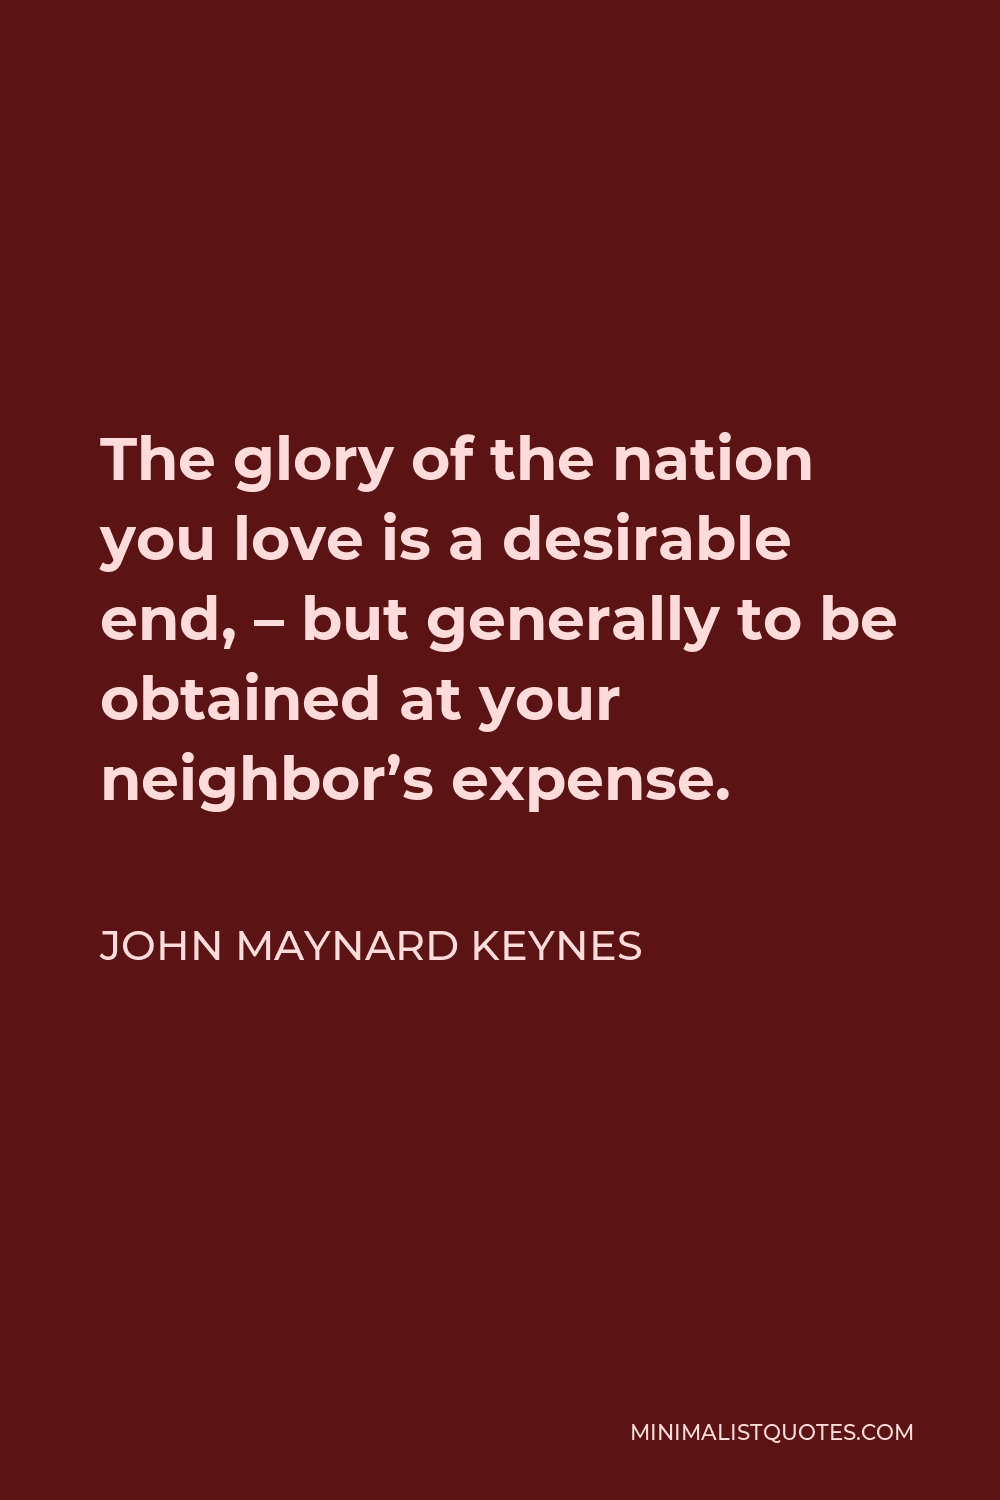 John Maynard Keynes Quote - The glory of the nation you love is a desirable end, – but generally to be obtained at your neighbor’s expense.